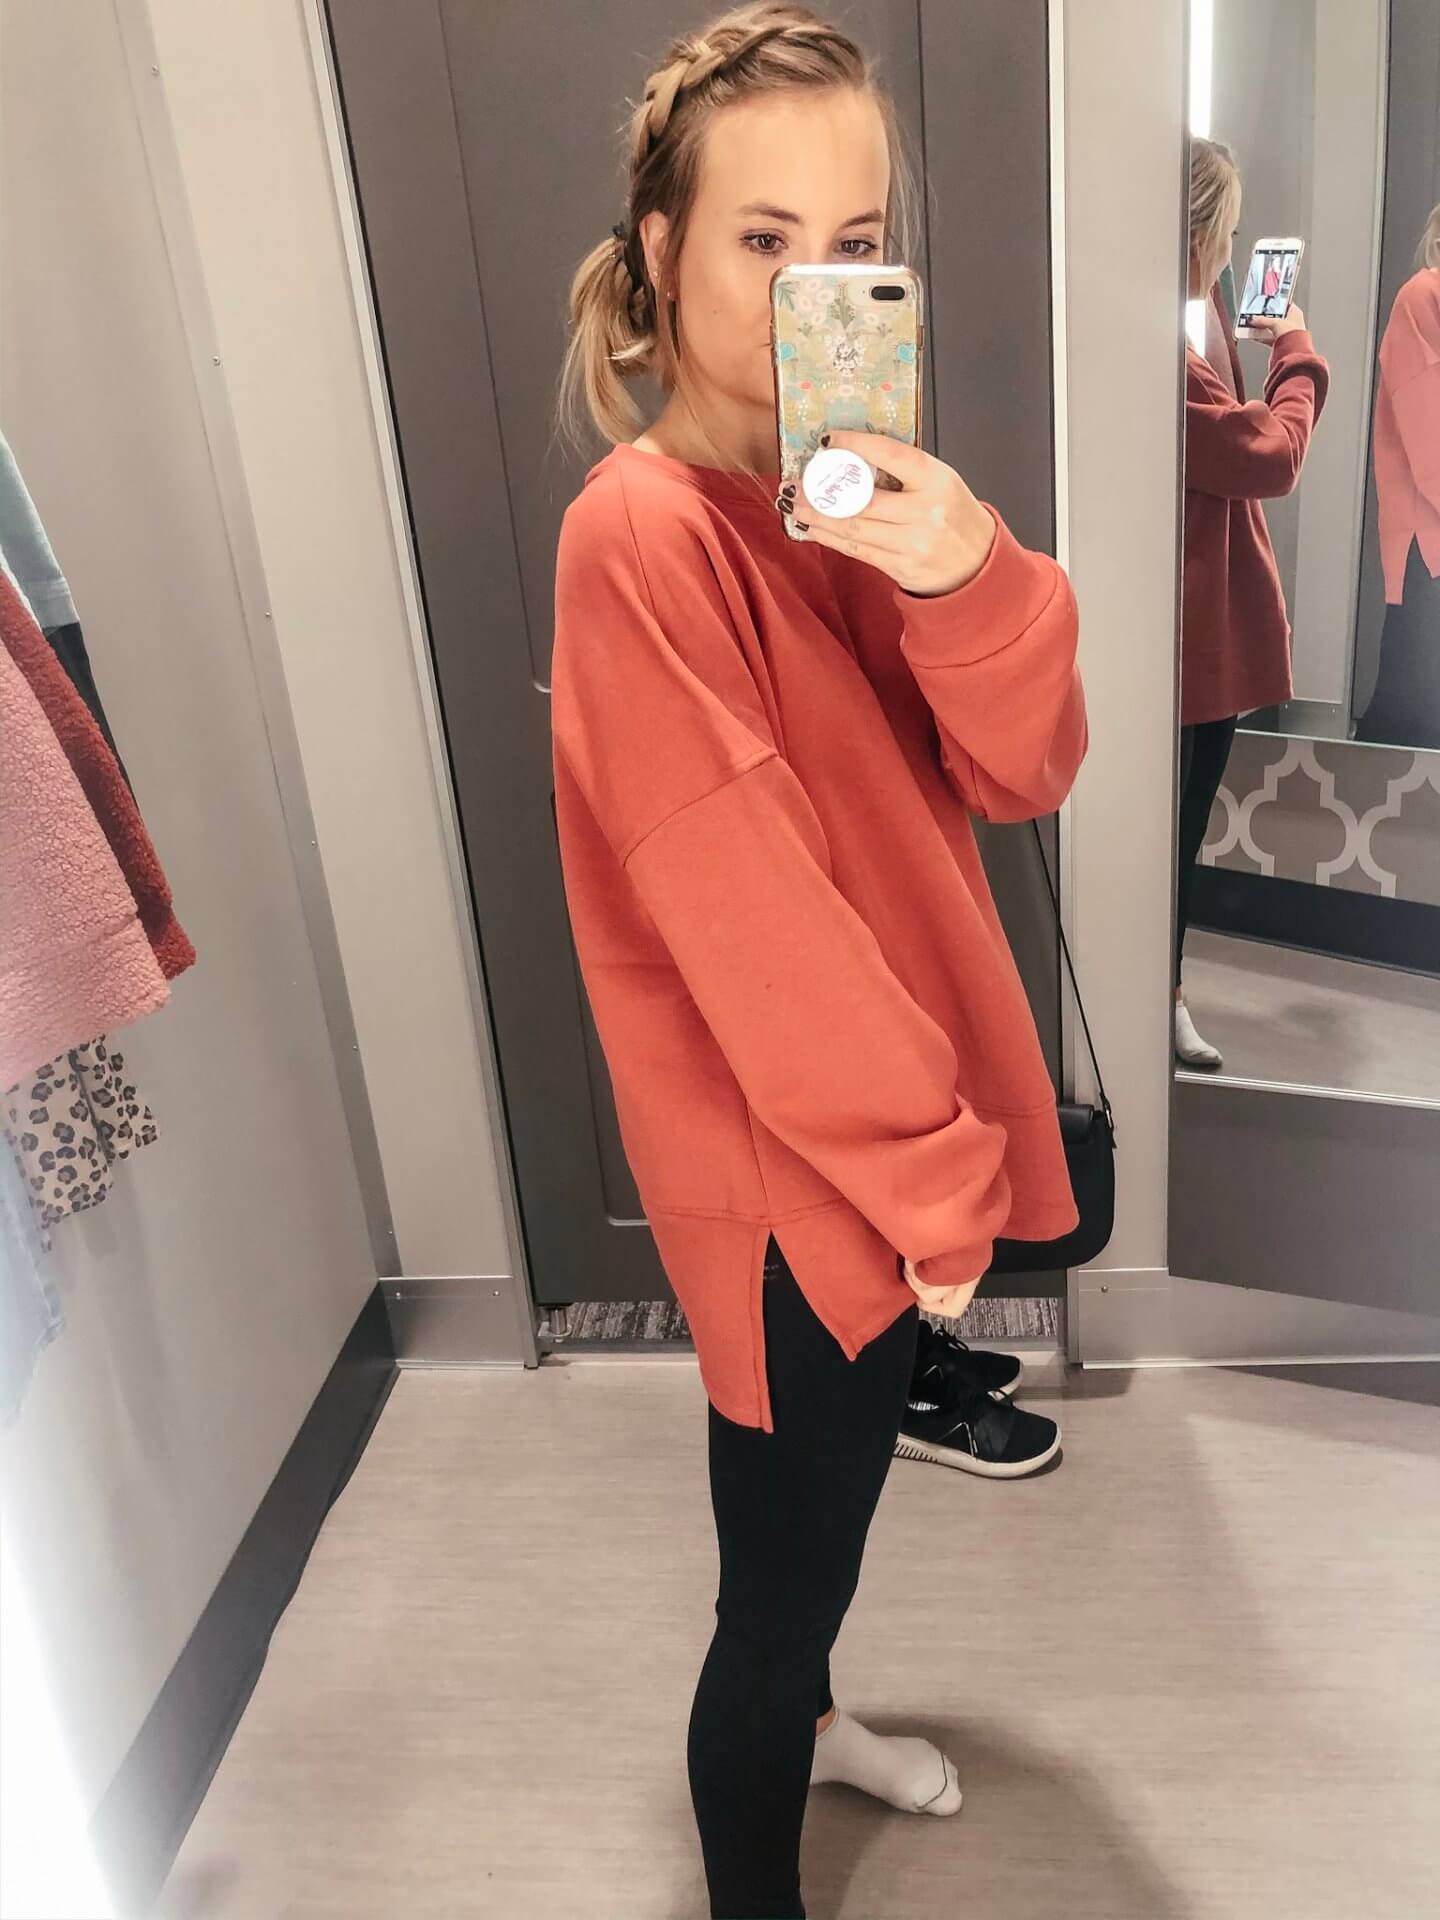 Target Try On. Fall Target Try On. New styles at Target right now for Fall. The Blonder Life